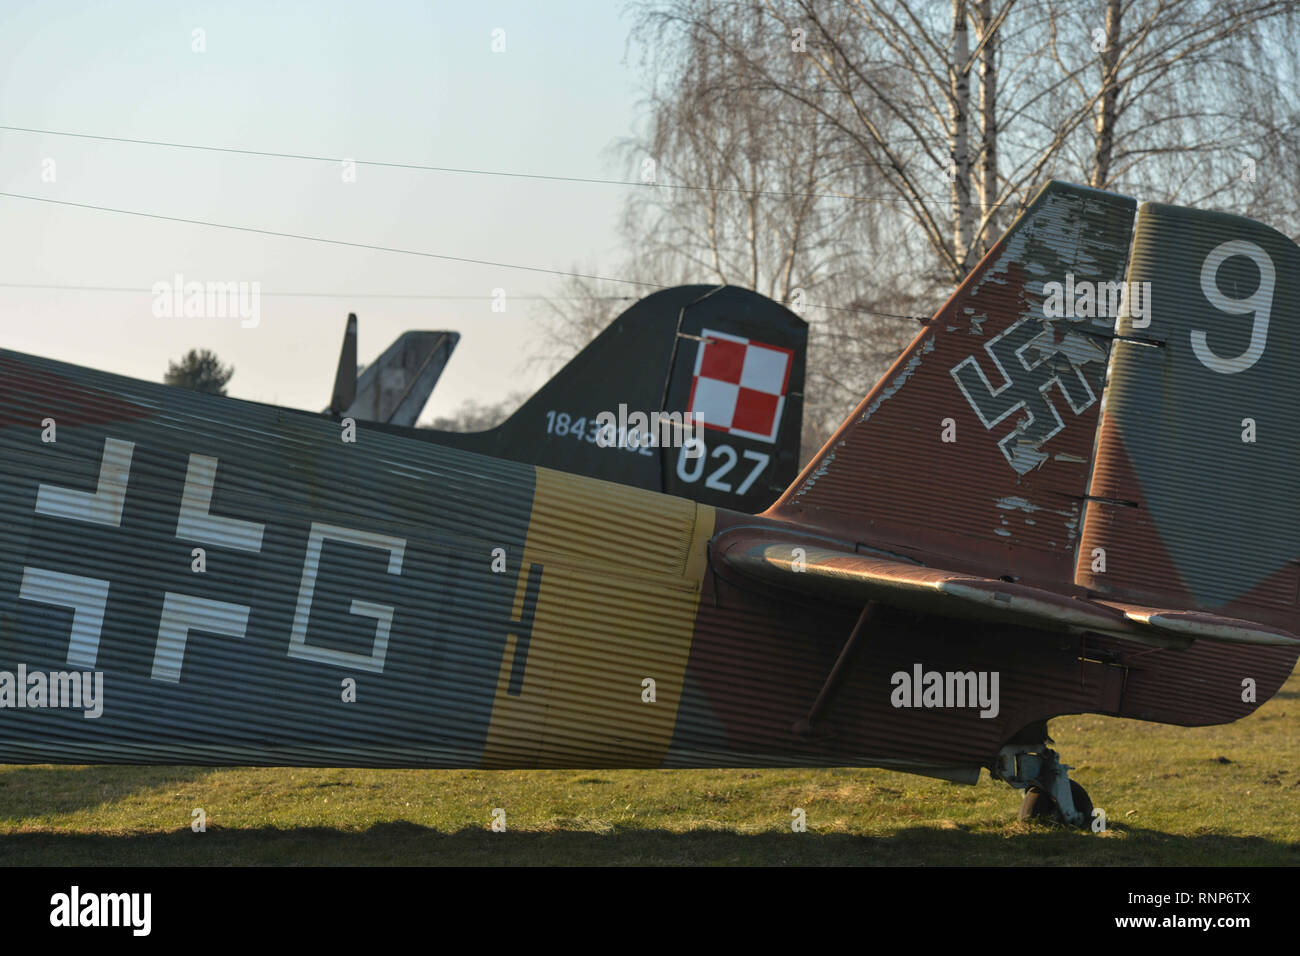 February 19, 2019 - Krakow, Malopolski Province, Poland - The Balkenkreuz, a straight-armed cross insignia seen painted on the Junkers Ju 52 and the Polish Air Force checkerboard on the background..The Polish Aviation Museum is located at the site of the former Krakow-Rakowice-Czyzyny Airport, established in 1912, one of the oldest in the world. The Museum collection consists of over 200 aircraft, dating WW1, WW2 and a collection of all airplane types developed or used by Poland after 1945. (Credit Image: © Cezary Kowalski/SOPA Images via ZUMA Wire) Stock Photo